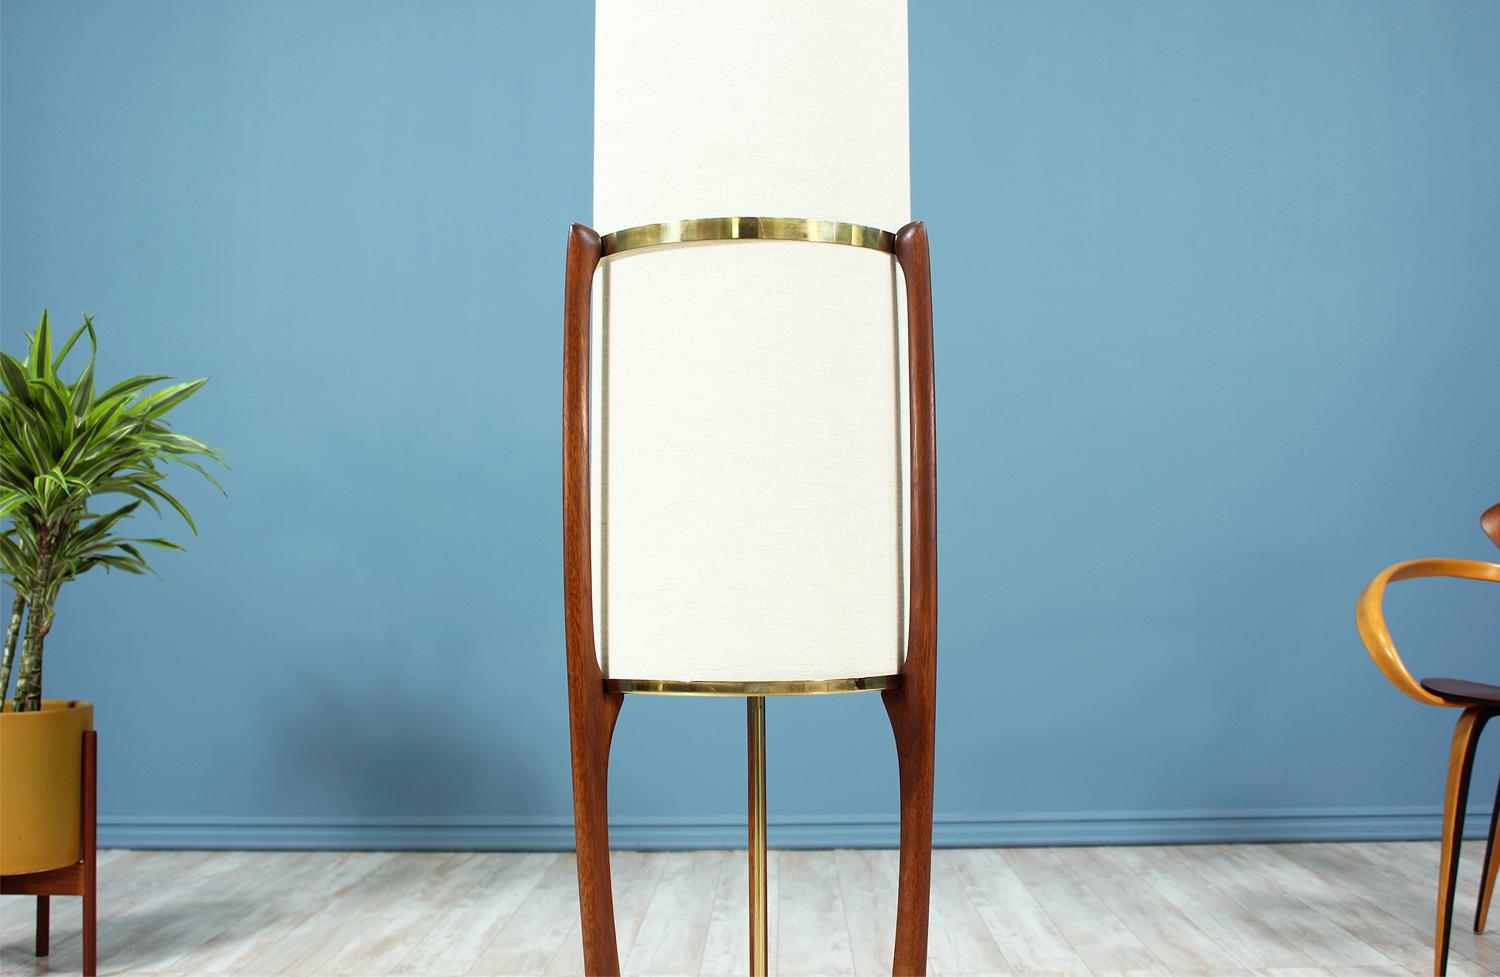 American Midcentury Sculptural Walnut and Brass Floor Lamp by Modeline